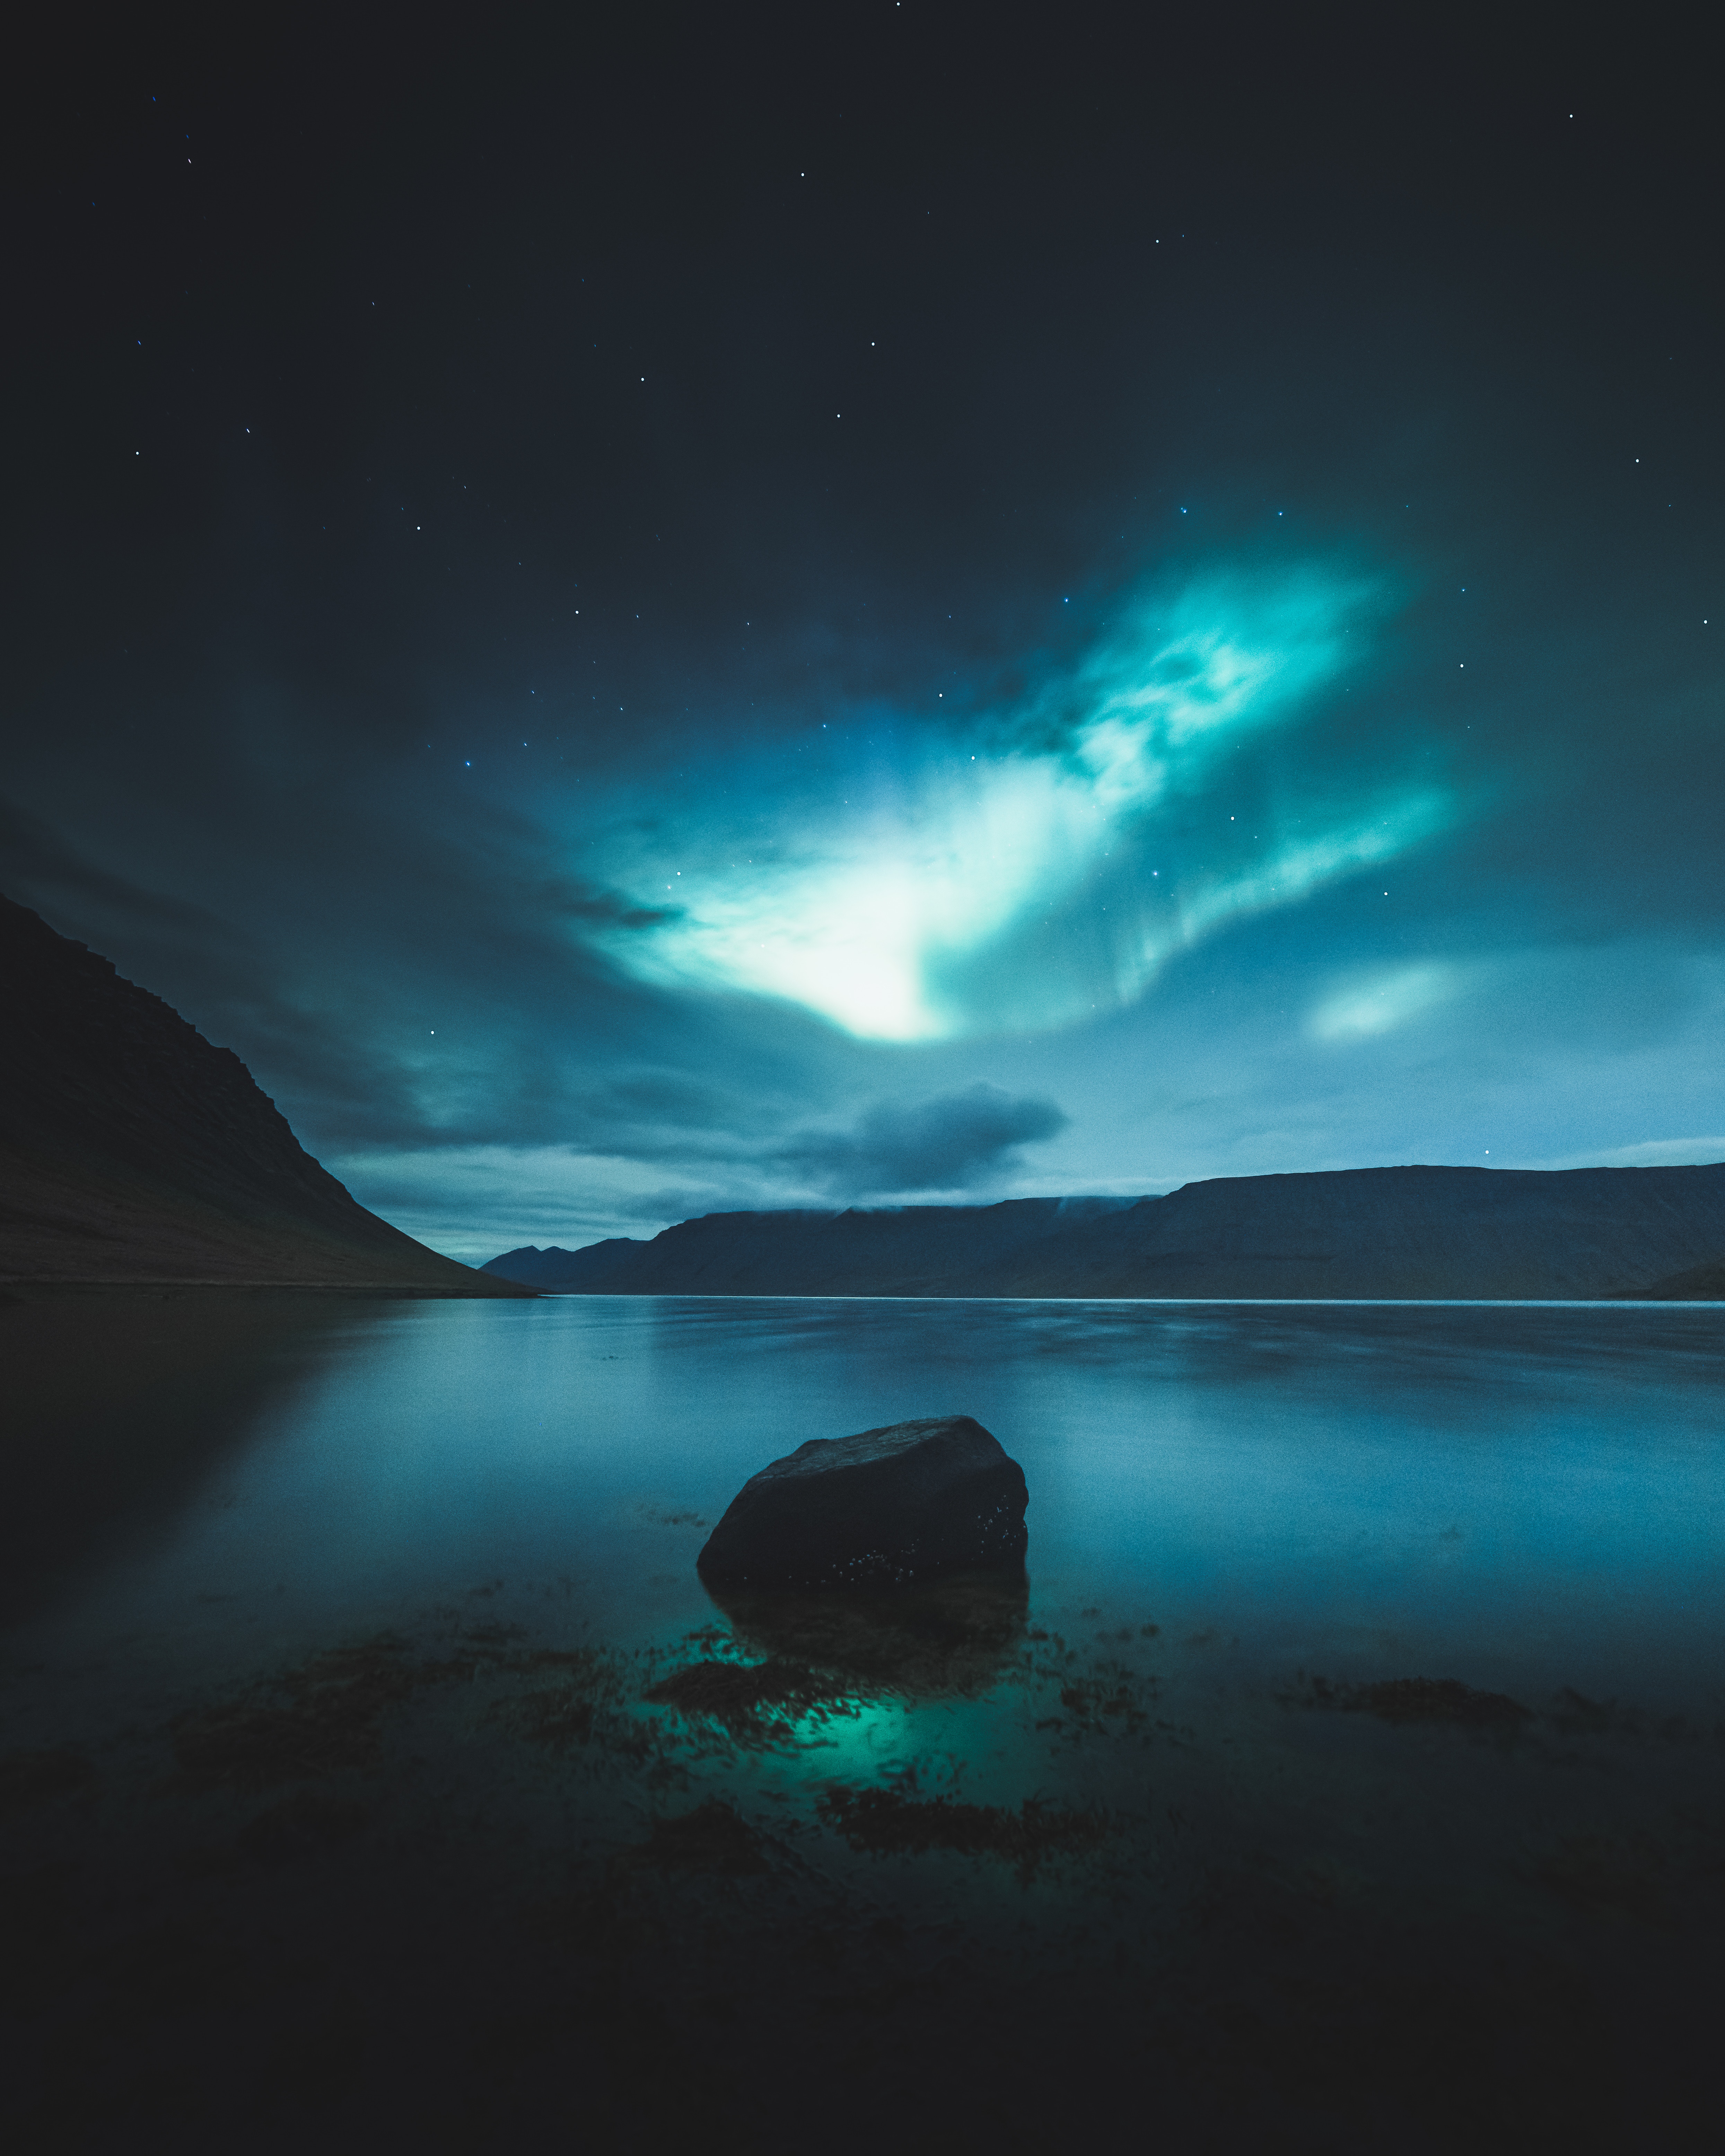 aurora borealis, northern lights, nature, sky, mountains, night, lake for android